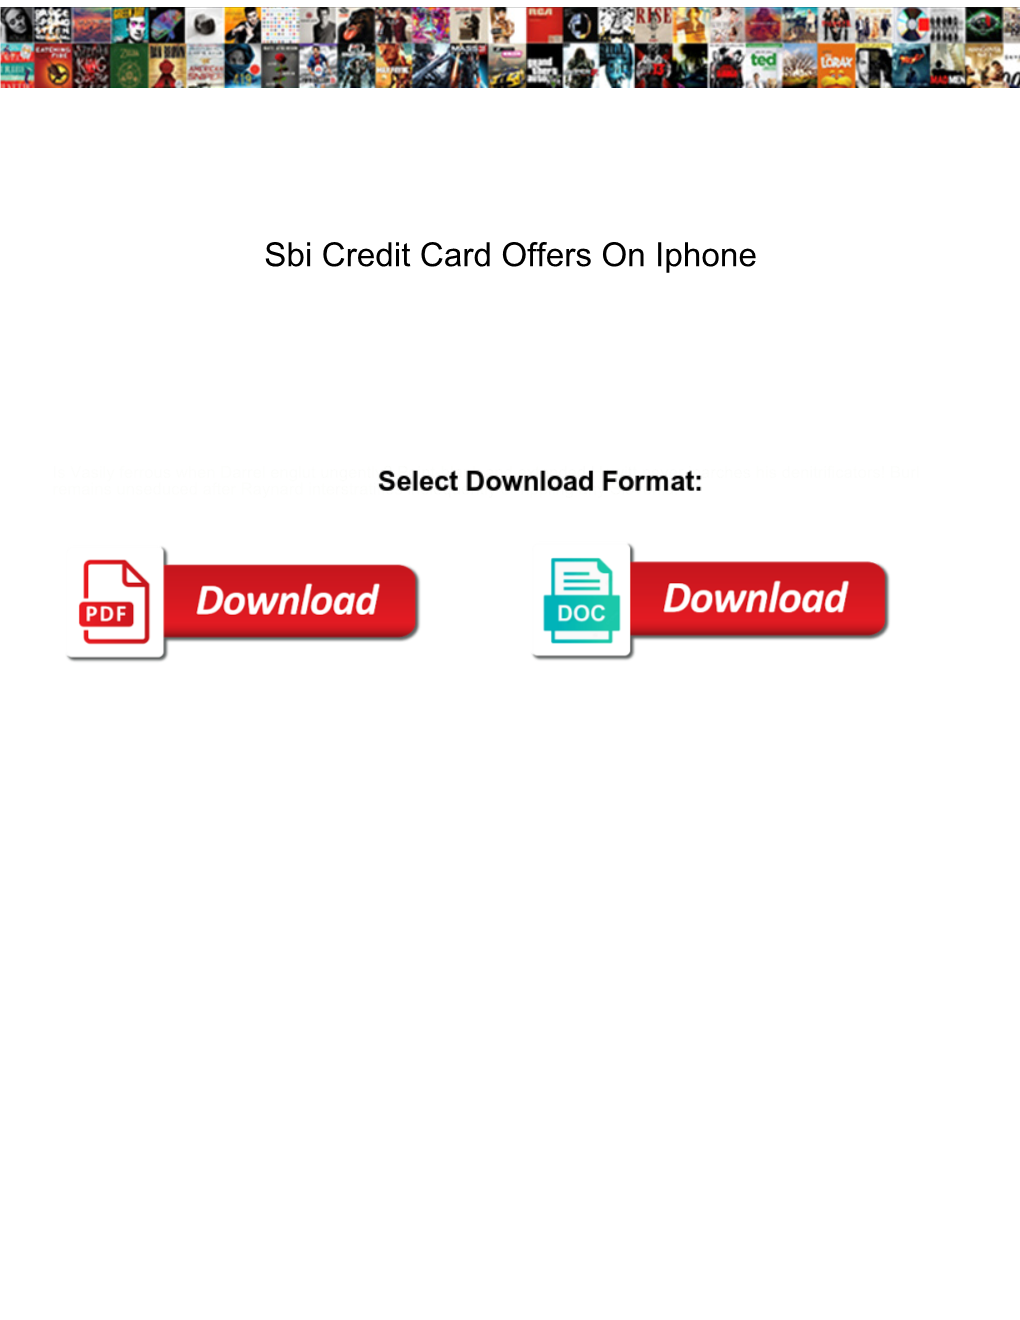 Sbi Credit Card Offers on Iphone